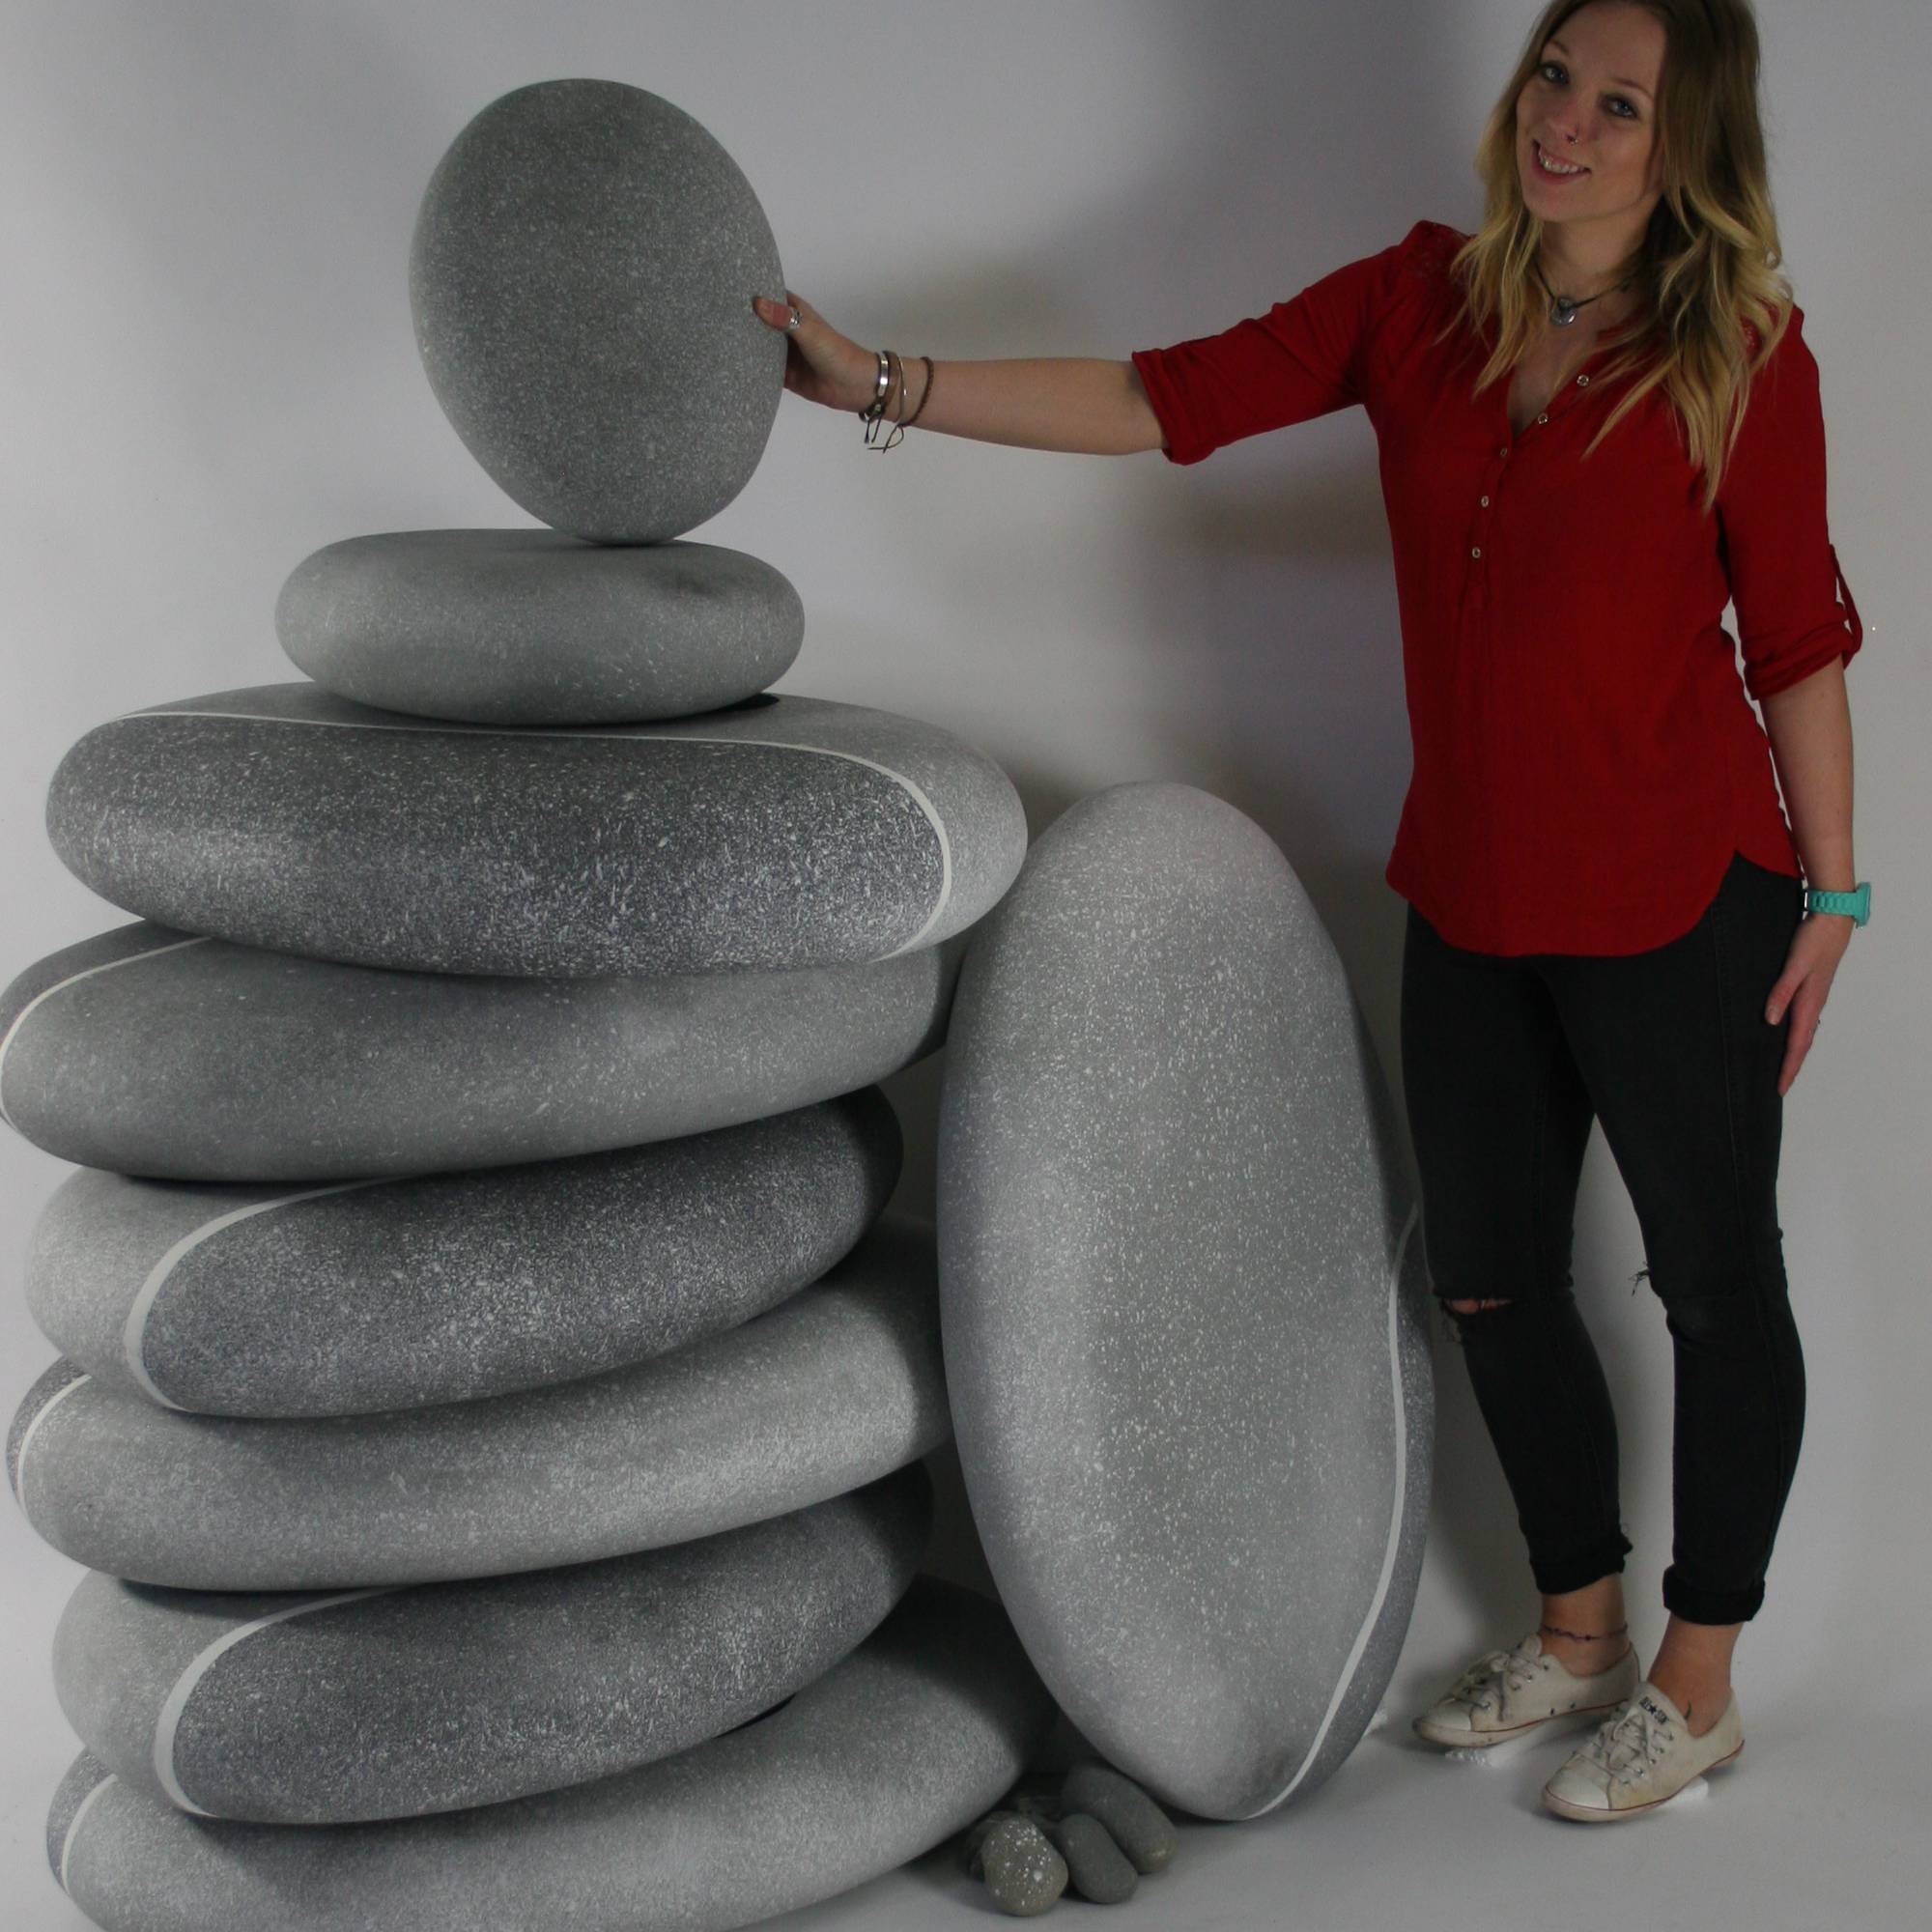 Imitation Rock Sculptures, Fake stones and boulders, from polystyrene  styrofoam for window display, film and theatrical.